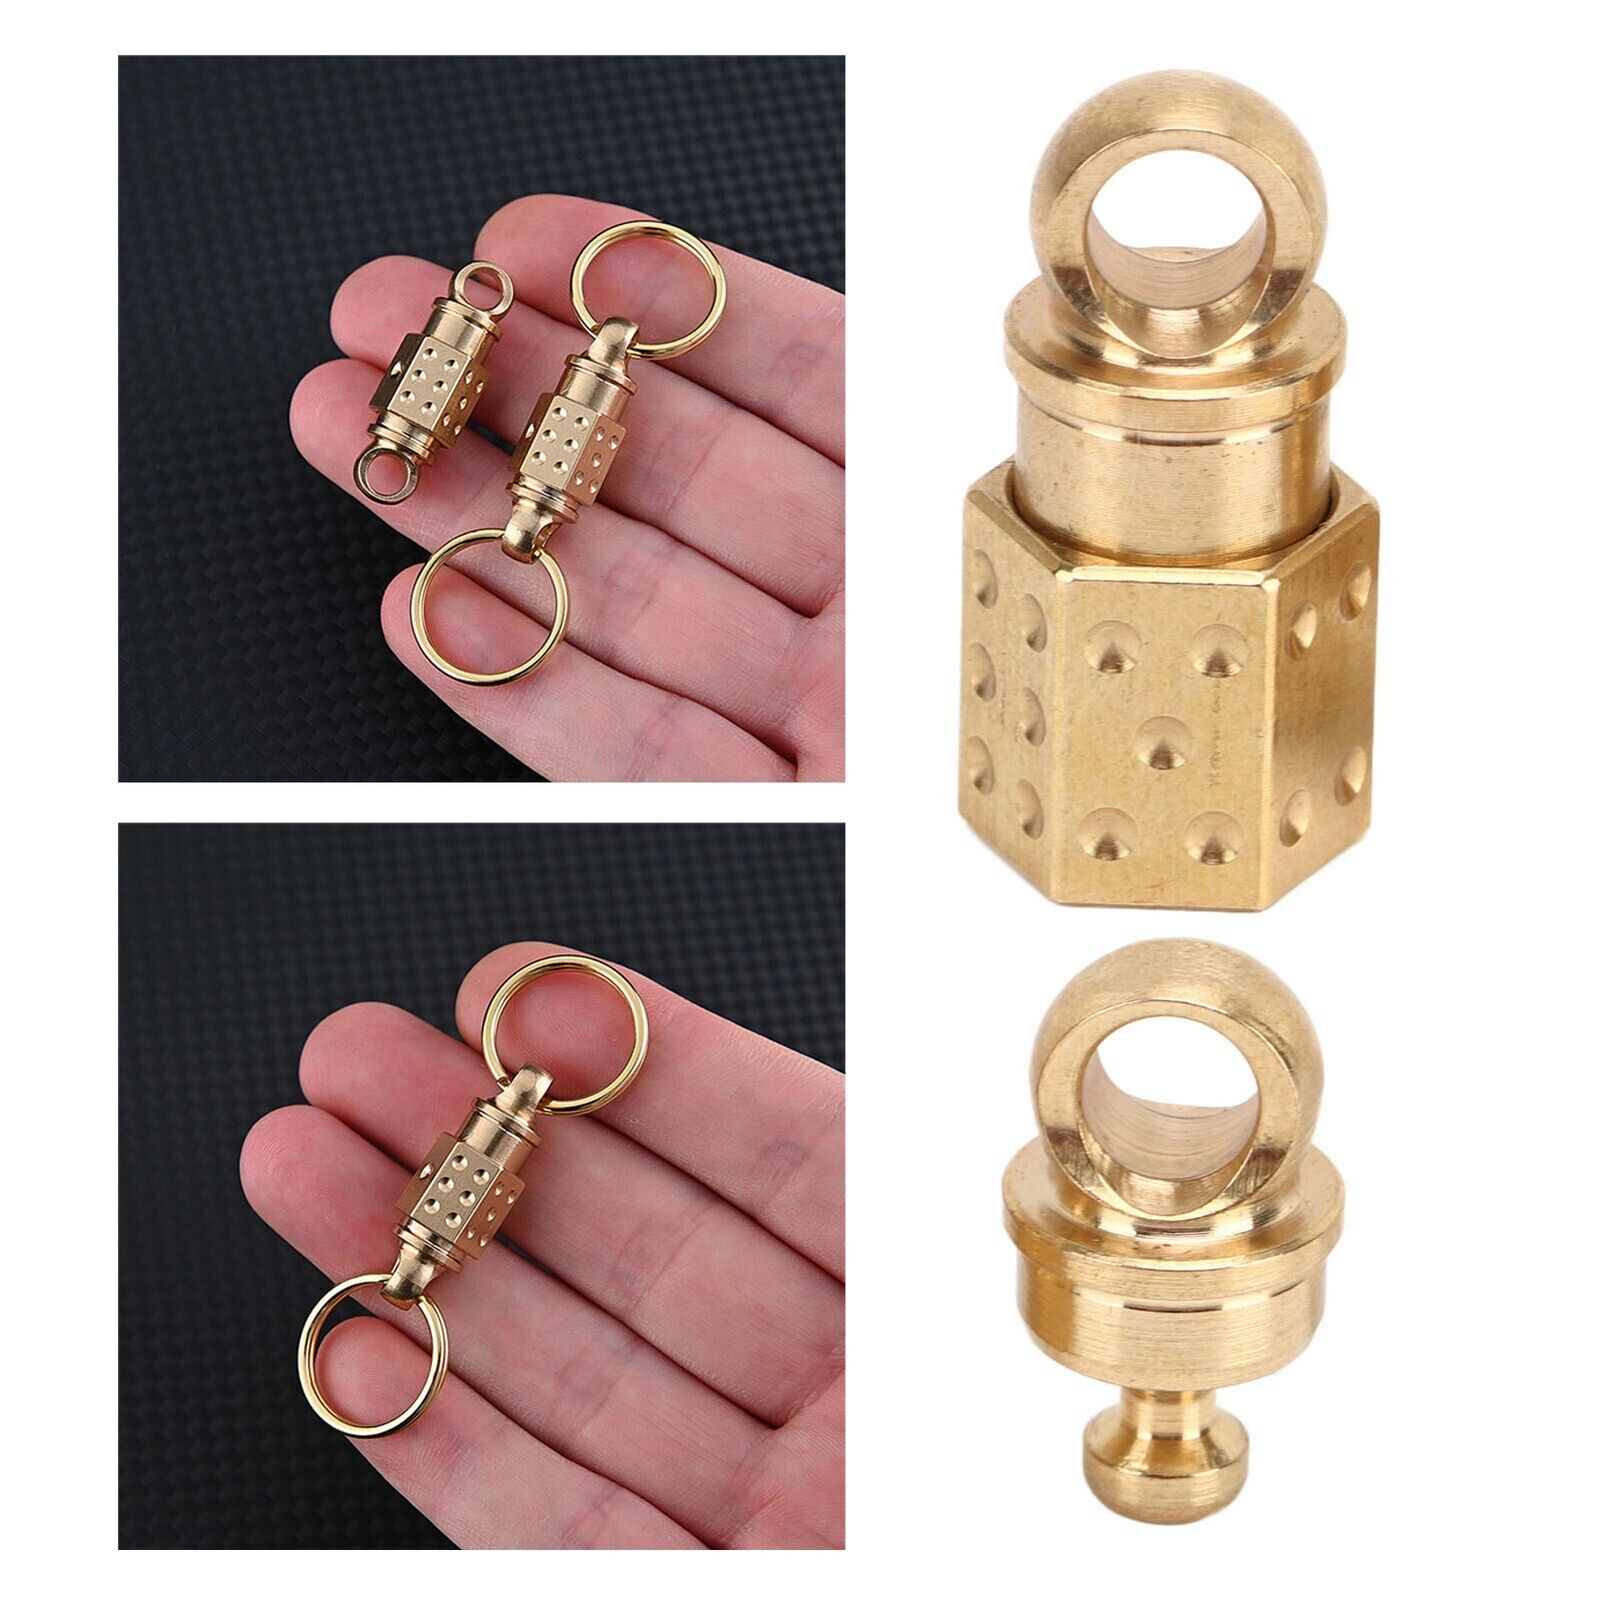 1pcs Quick Release Keyrings Brass Detachable Universal Joint Keychain Sets